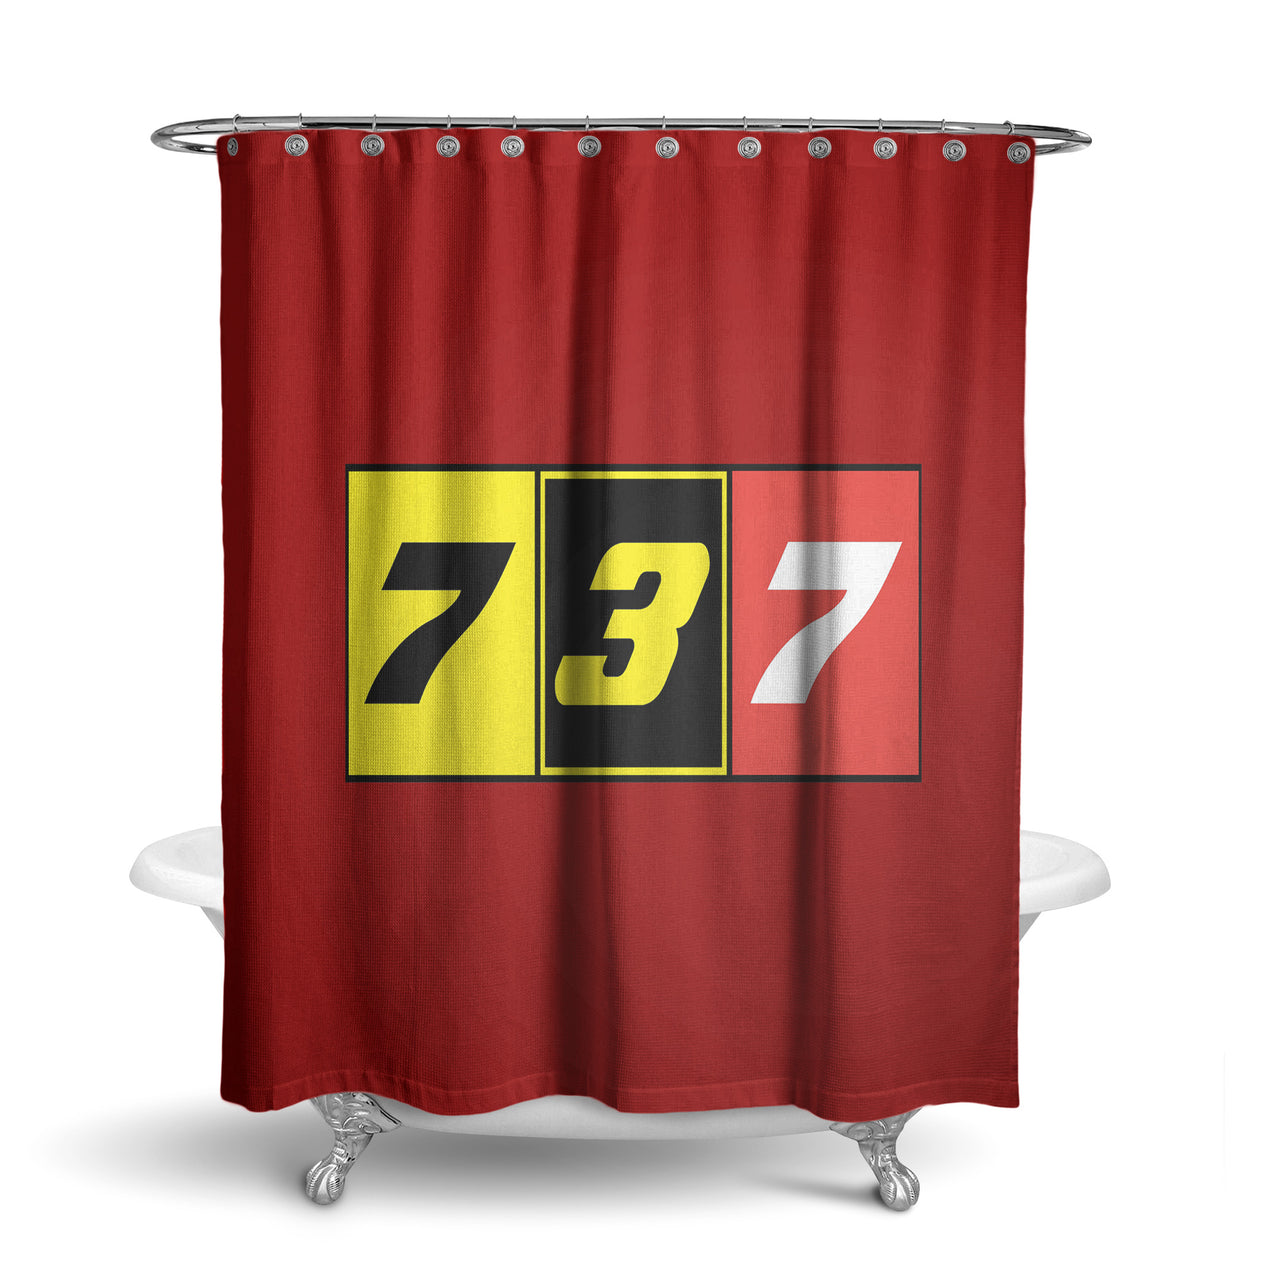 Flat Colourful 737 Designed Shower Curtains